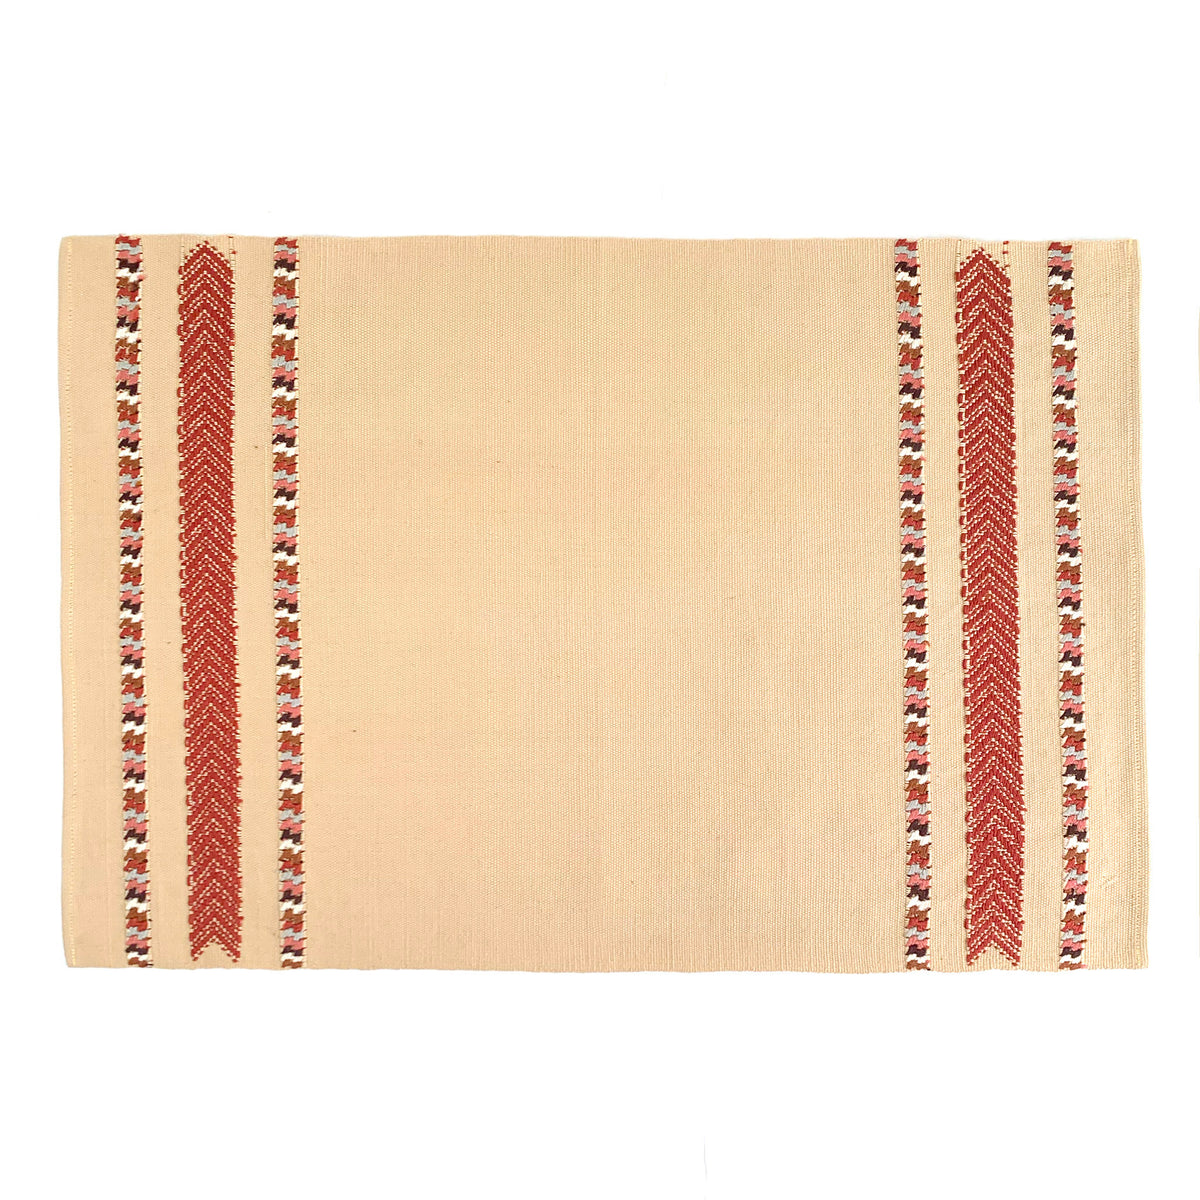 Handwoven placemat with brocade designs on side, made in Guatemala by Mayan weavers